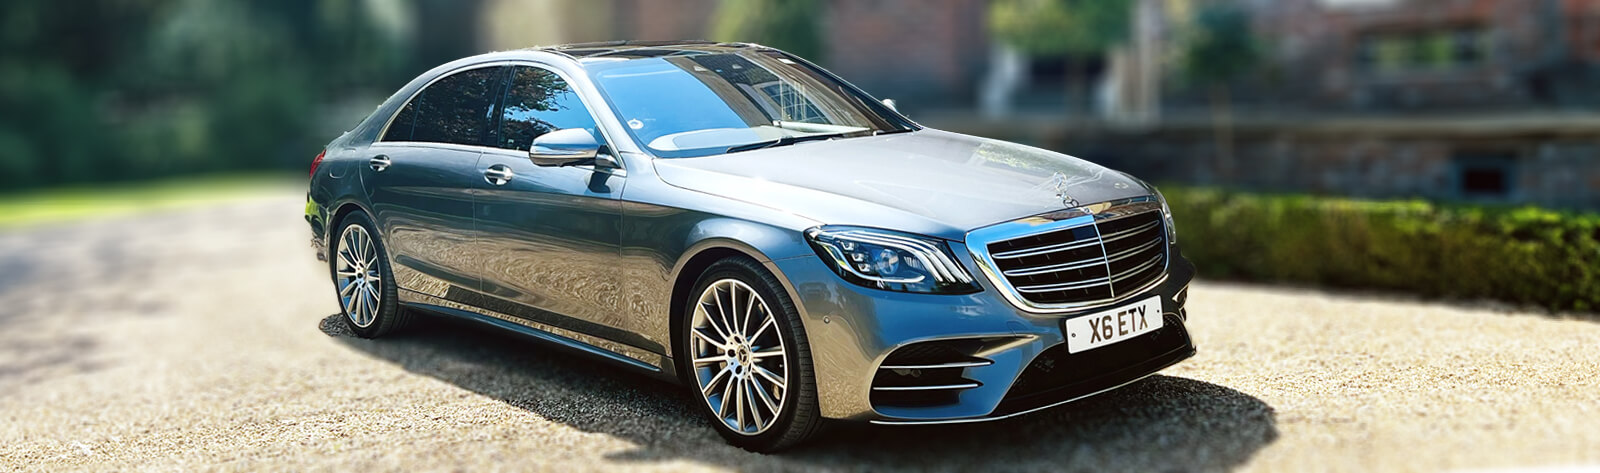 mercedes v class and mercedes s class Stockport